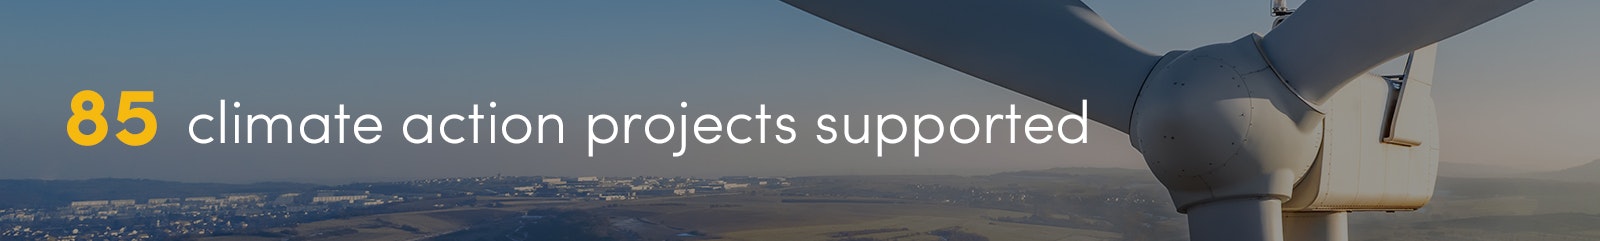 85 climate action projects supported